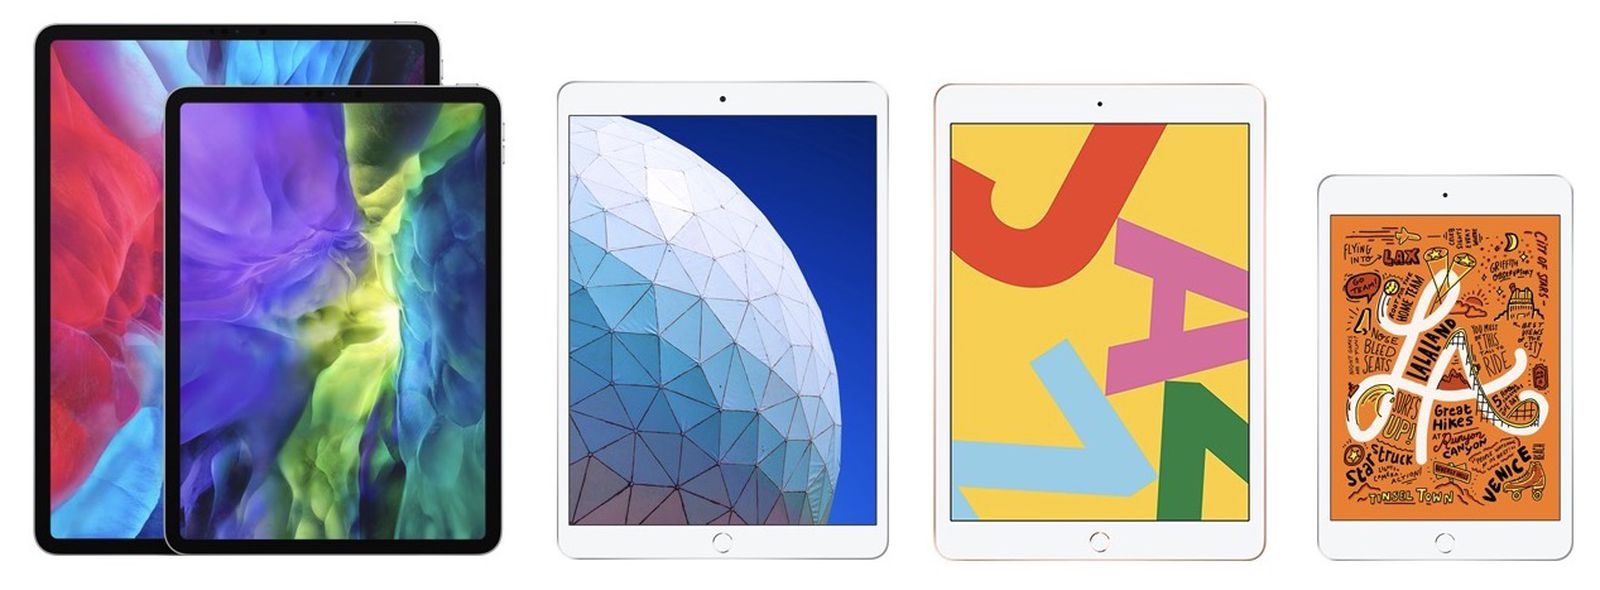 Picking the Best iPad to Buy in 2020